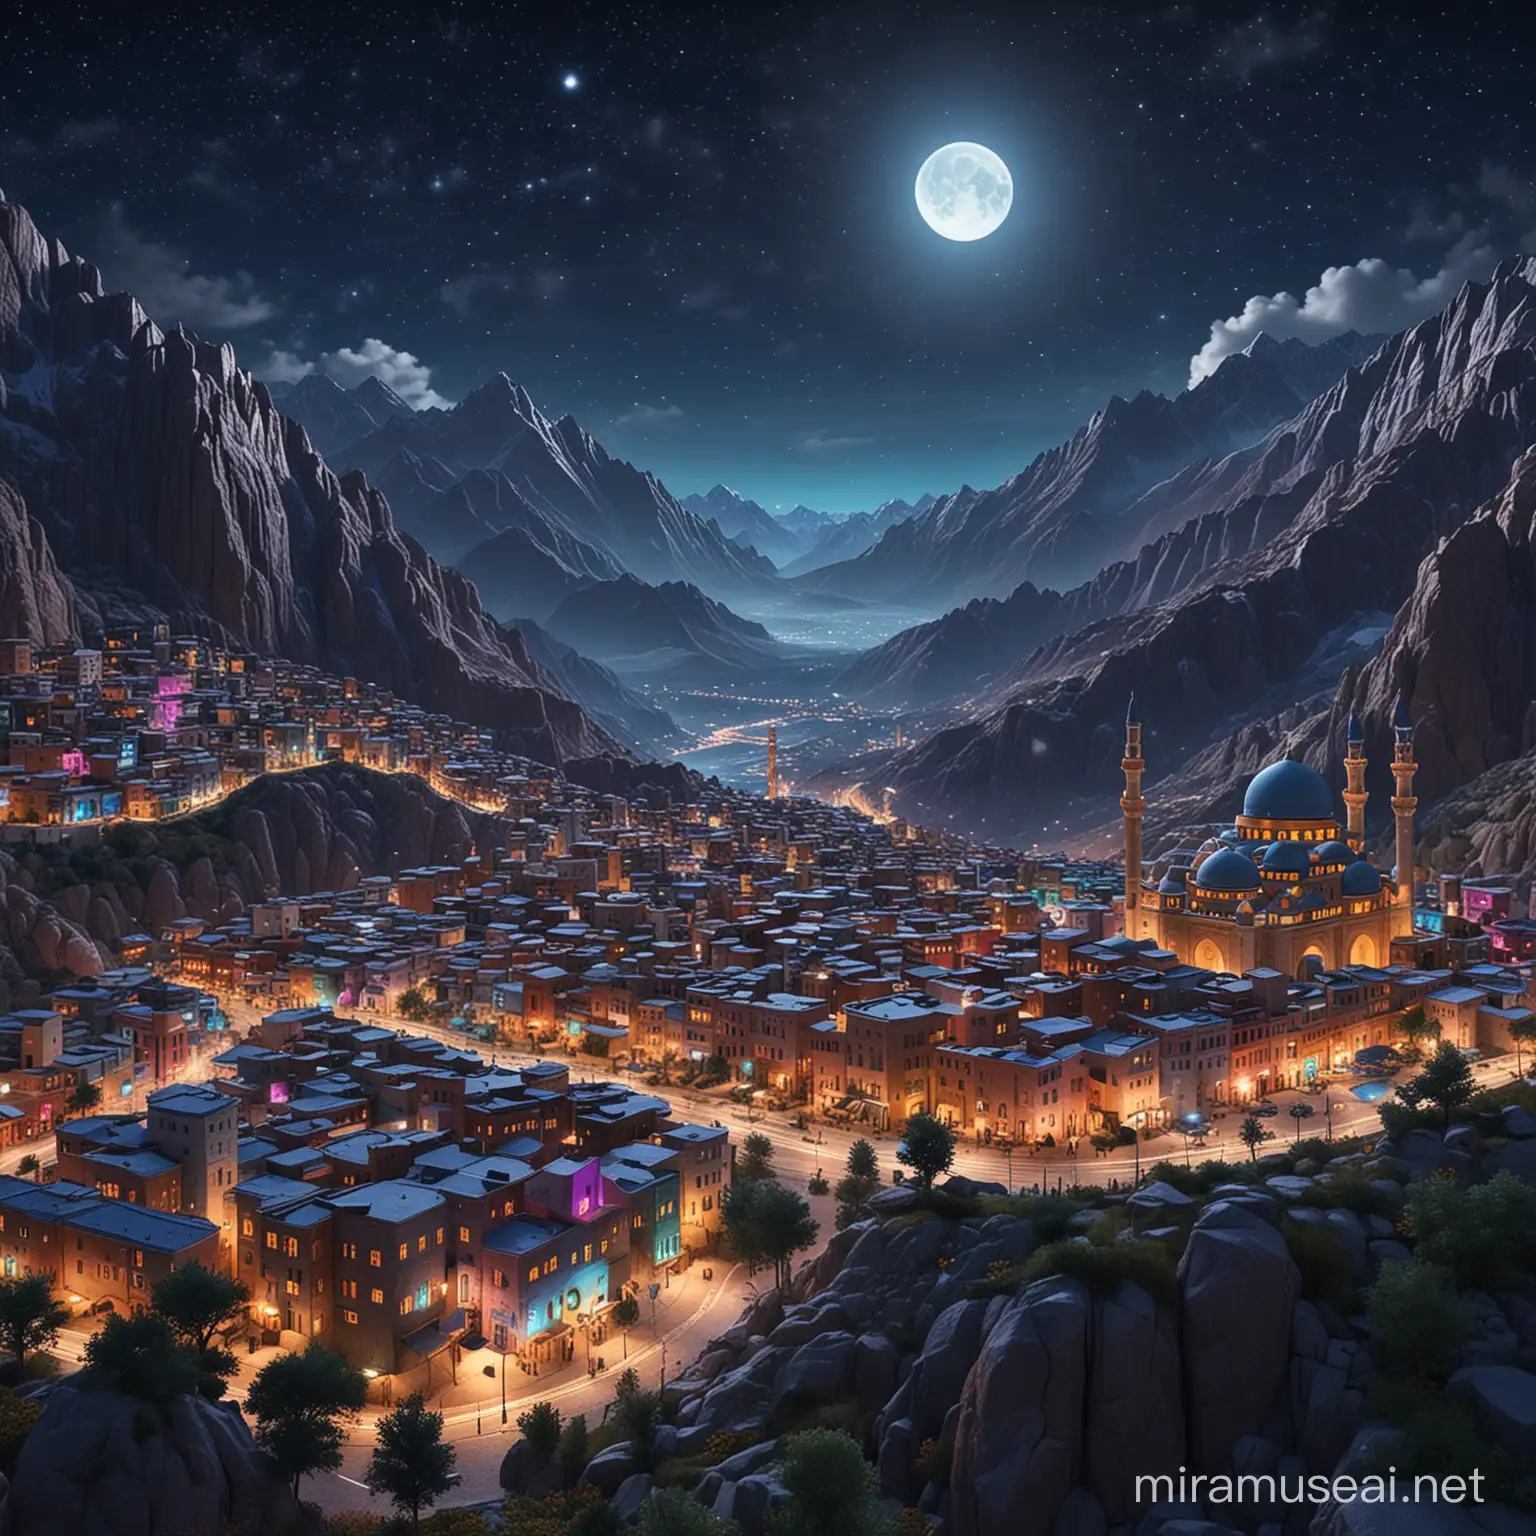 A beautiful colorful 3d Muslim city, night time, with moon and stars, in a mountainous environment 